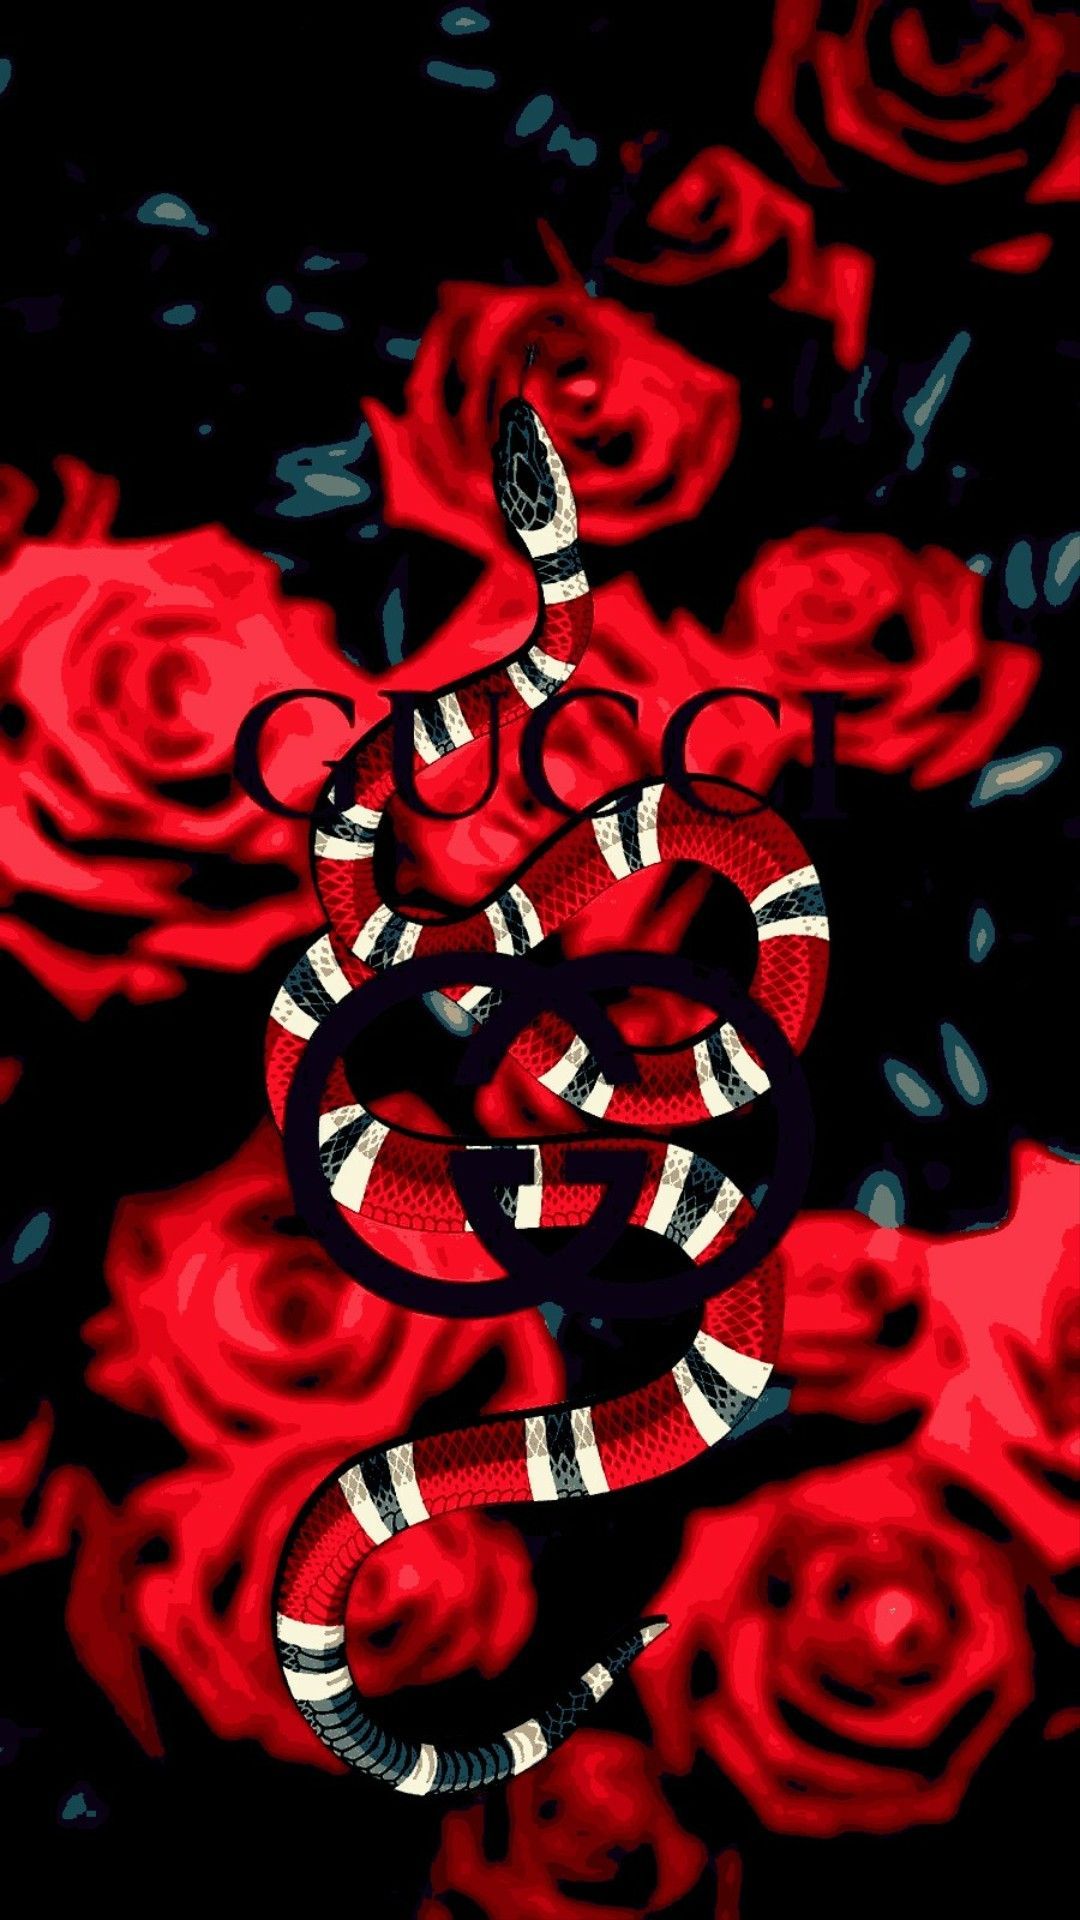 Free download Roses of Gucci Snake Wallpaper in 2019 Gucci